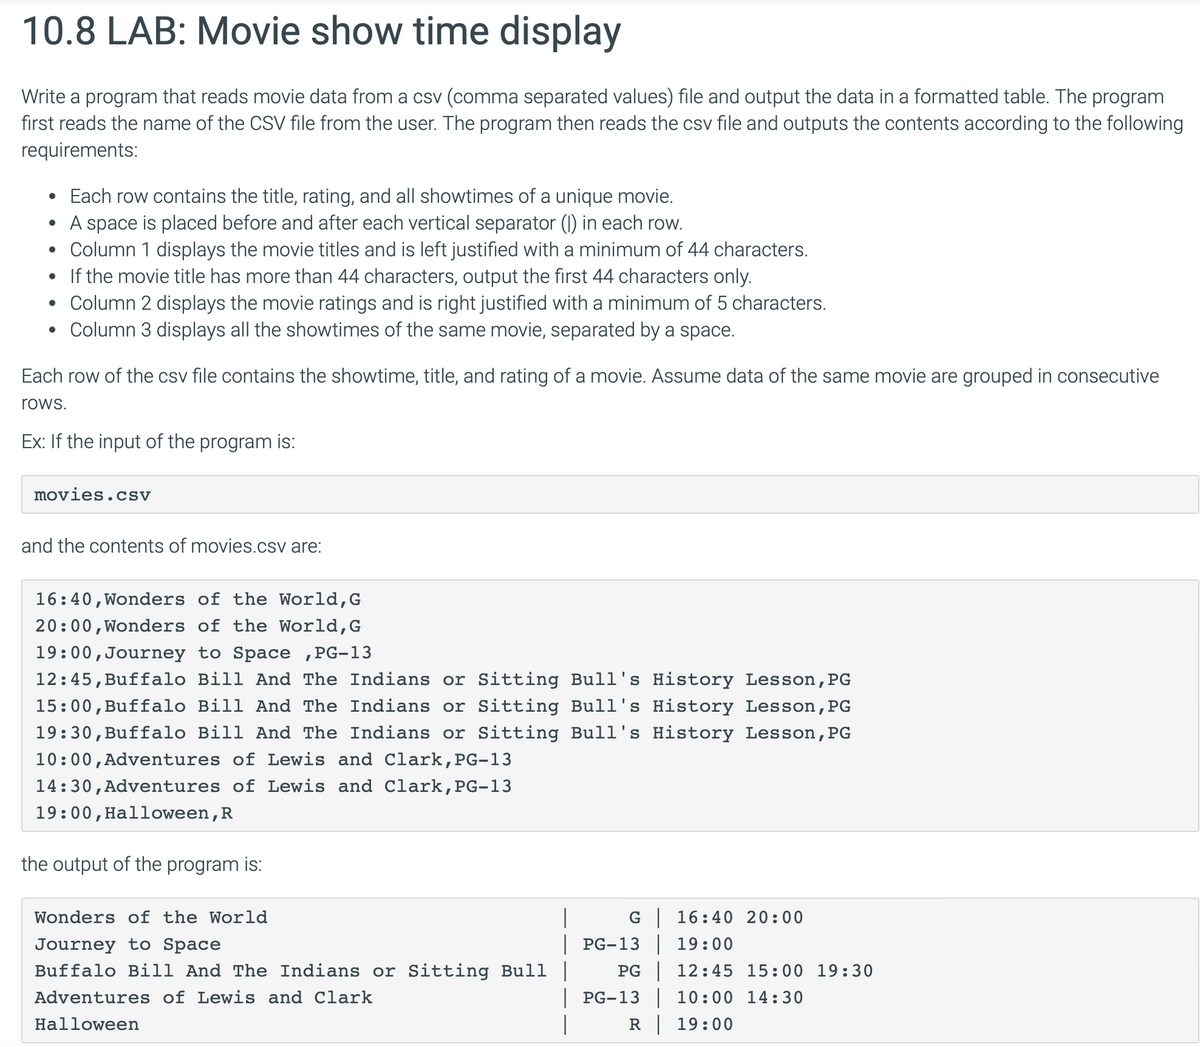 10.8 LAB: Movie show time display
Write a program that reads movie data from a csv (comma separated values) file and output the data in a formatted table. The program
first reads the name of the CSV file from the user. The program then reads the csv file and outputs the contents according to the following
requirements:
• Each row contains the title, rating, and all showtimes of a unique movie.
• A space is placed before and after each vertical separator (1) in each row.
.
Column 1 displays the movie titles and is left justified with a minimum of 44 characters.
• If the movie title has more than 44 characters, output the first 44 characters only.
• Column 2 displays the movie ratings and is right justified with a minimum of 5 characters.
.
Column 3 displays all the showtimes of the same movie, separated by a space.
Each row of the csv file contains the showtime, title, and rating of a movie. Assume data of the same movie are grouped in consecutive
rows.
Ex: If the input of the program is:
movies.csv
and the contents of movies.csv are:
16:40, Wonders of the World, G
20:00, Wonders of the World, G
19:00, Journey to Space, PG-13
12:45, Buffalo Bill And The Indians or Sitting Bull's History Lesson, PG
15:00, Buffalo Bill And The Indians or Sitting Bull's History Lesson, PG
19:30, Buffalo Bill And The Indians or Sitting Bull's History Lesson, PG
10:00, Adventures of Lewis and Clark, PG-13
14:30, Adventures of Lewis and Clark, PG-13
19:00, Halloween, R
the output of the program is:
Wonders of the World
Journey to Space
Buffalo Bill And The Indians or Sitting Bull |
Adventures of Lewis and Clark
Halloween
G | 16:40 20:00
| PG-13 | 19:00
PG 12:45 15:00 19:30
| PG-13 | 10:00 14:30
R 19:00